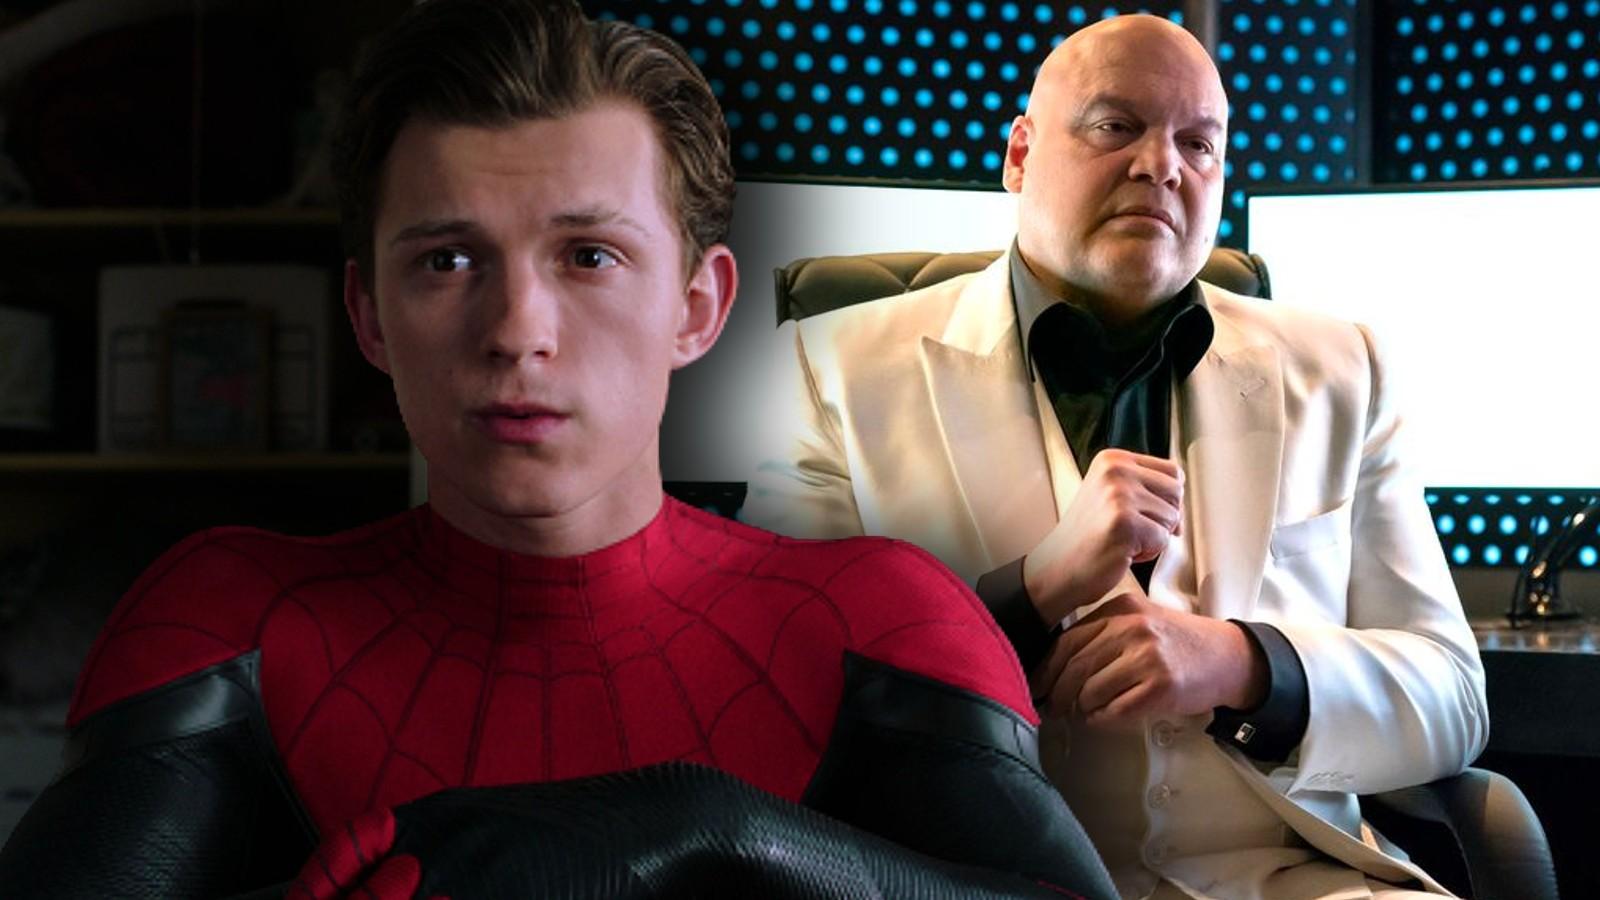 Spider-Man 4 with Tobey Maguire “rumored” to be in the works - Dexerto